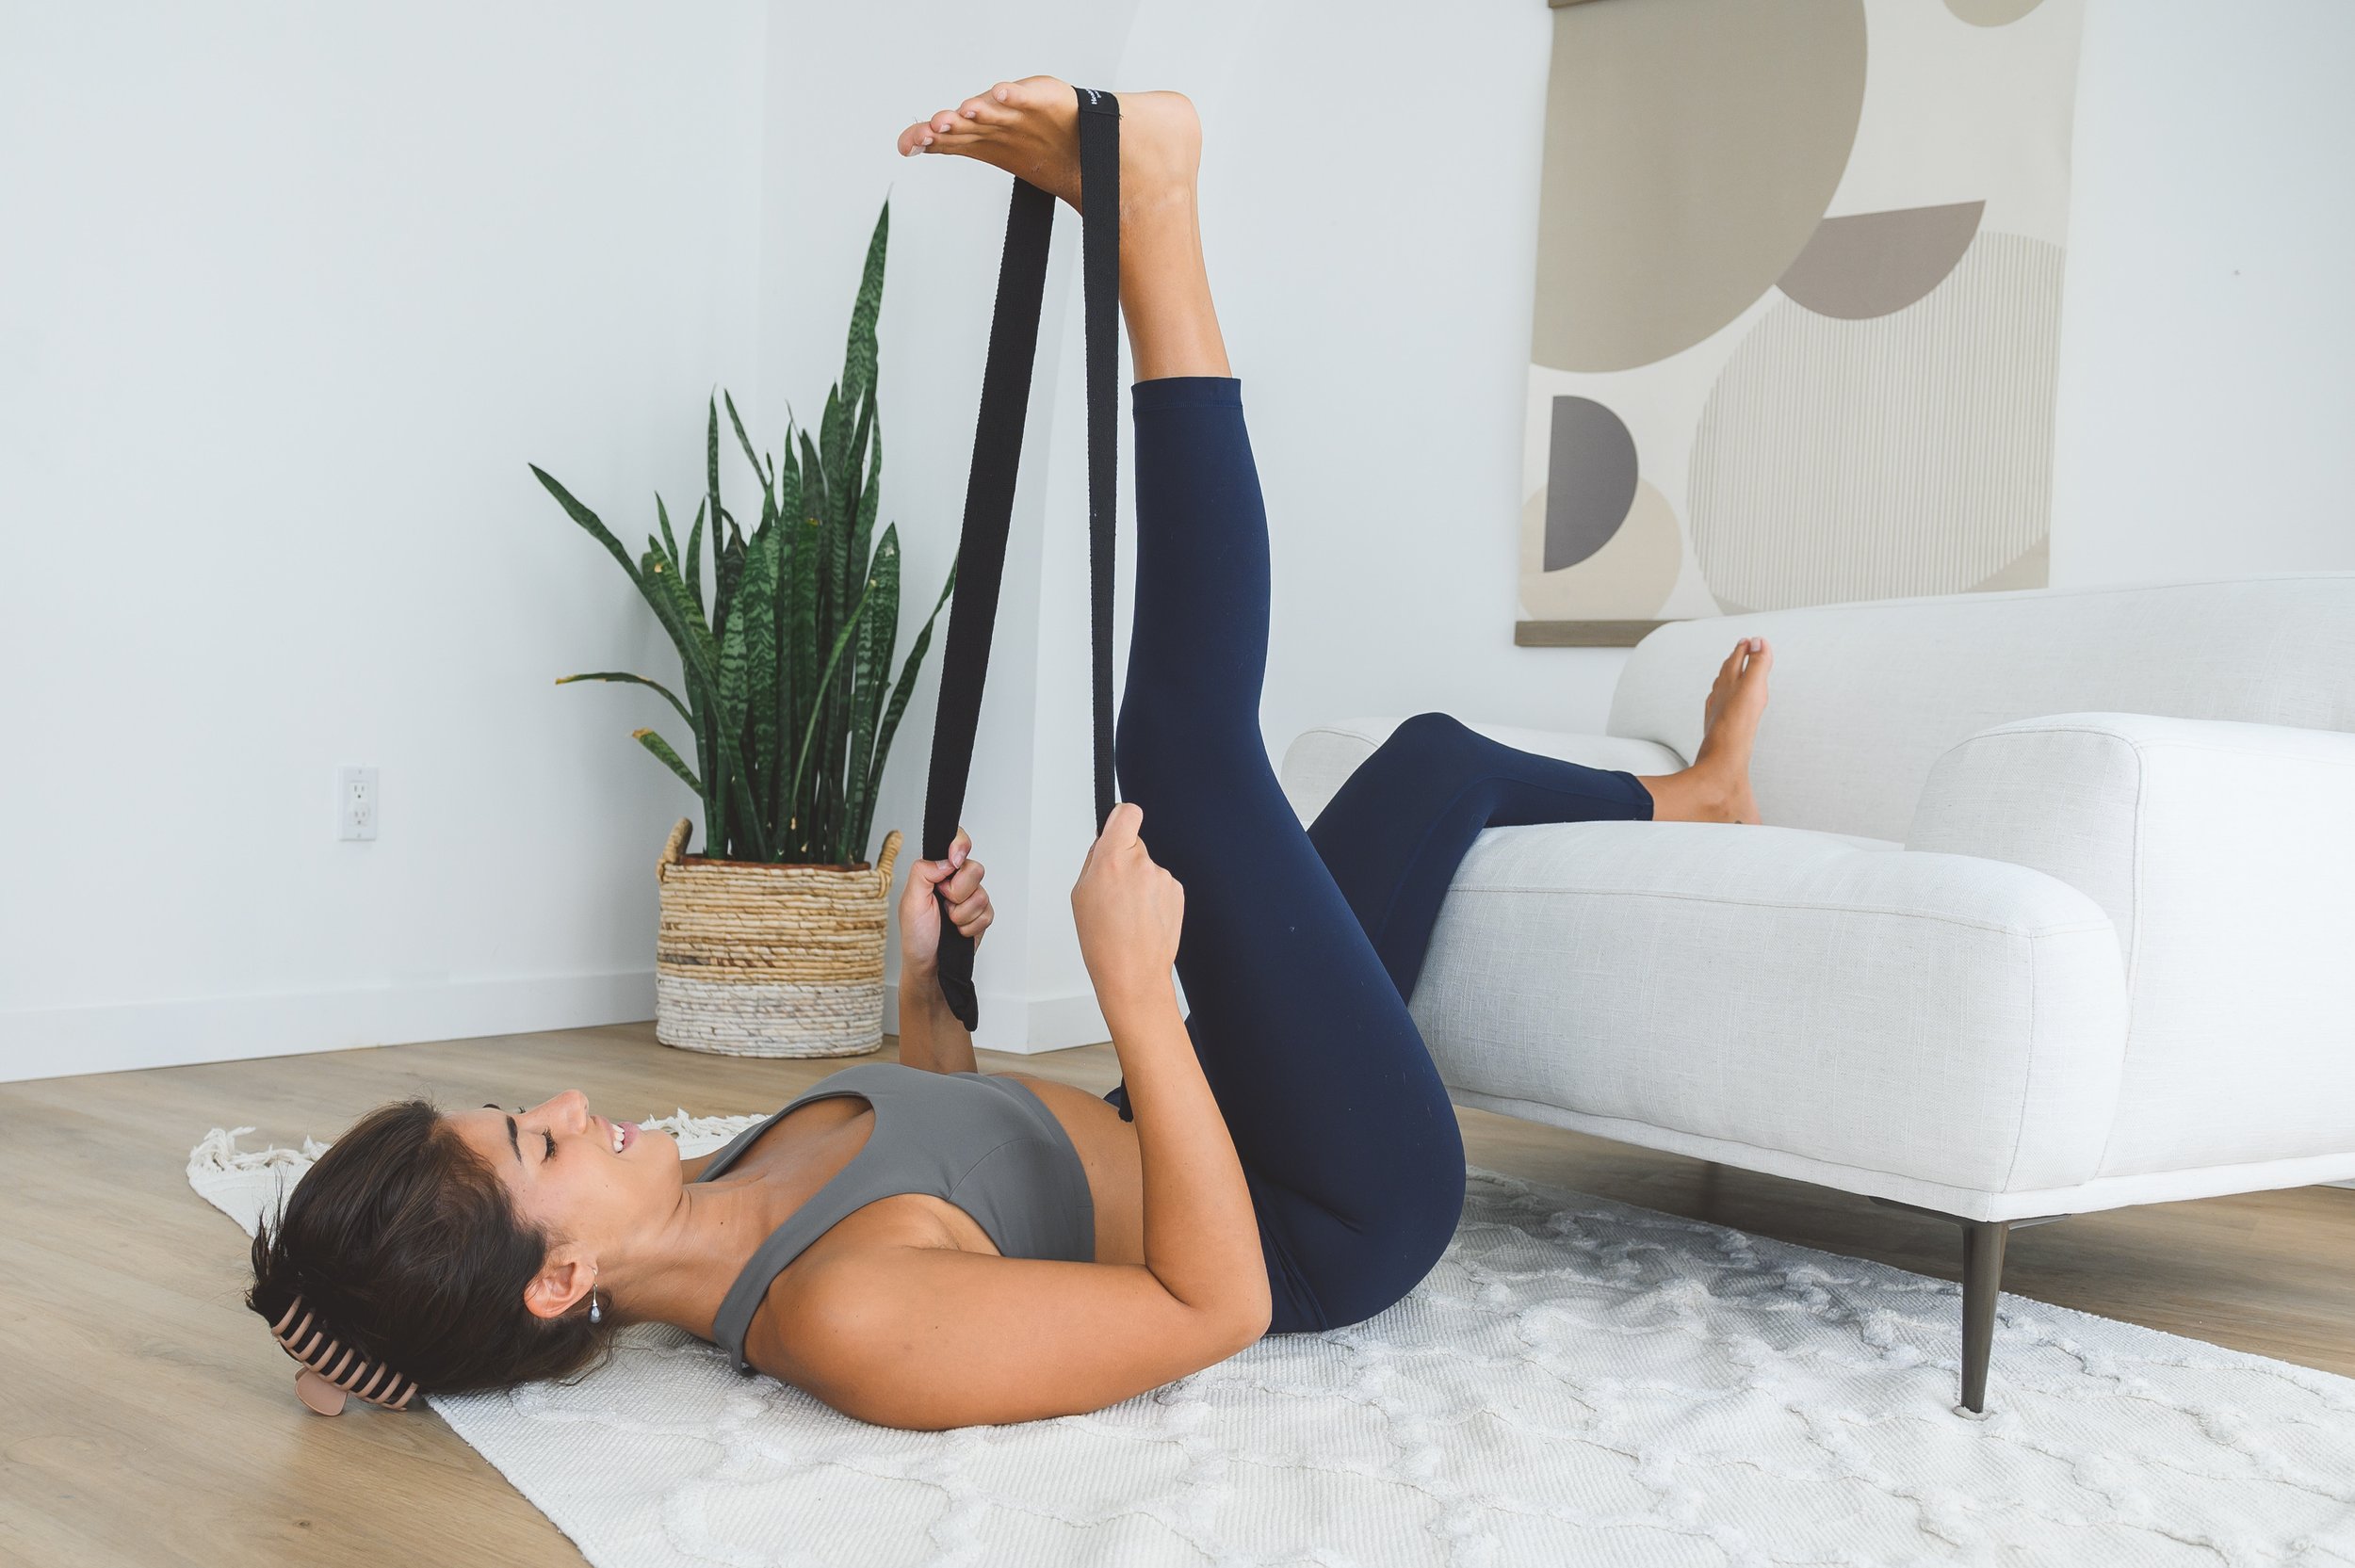 Equipment for Online MFR Self-Care and Yoga Classes - Relax